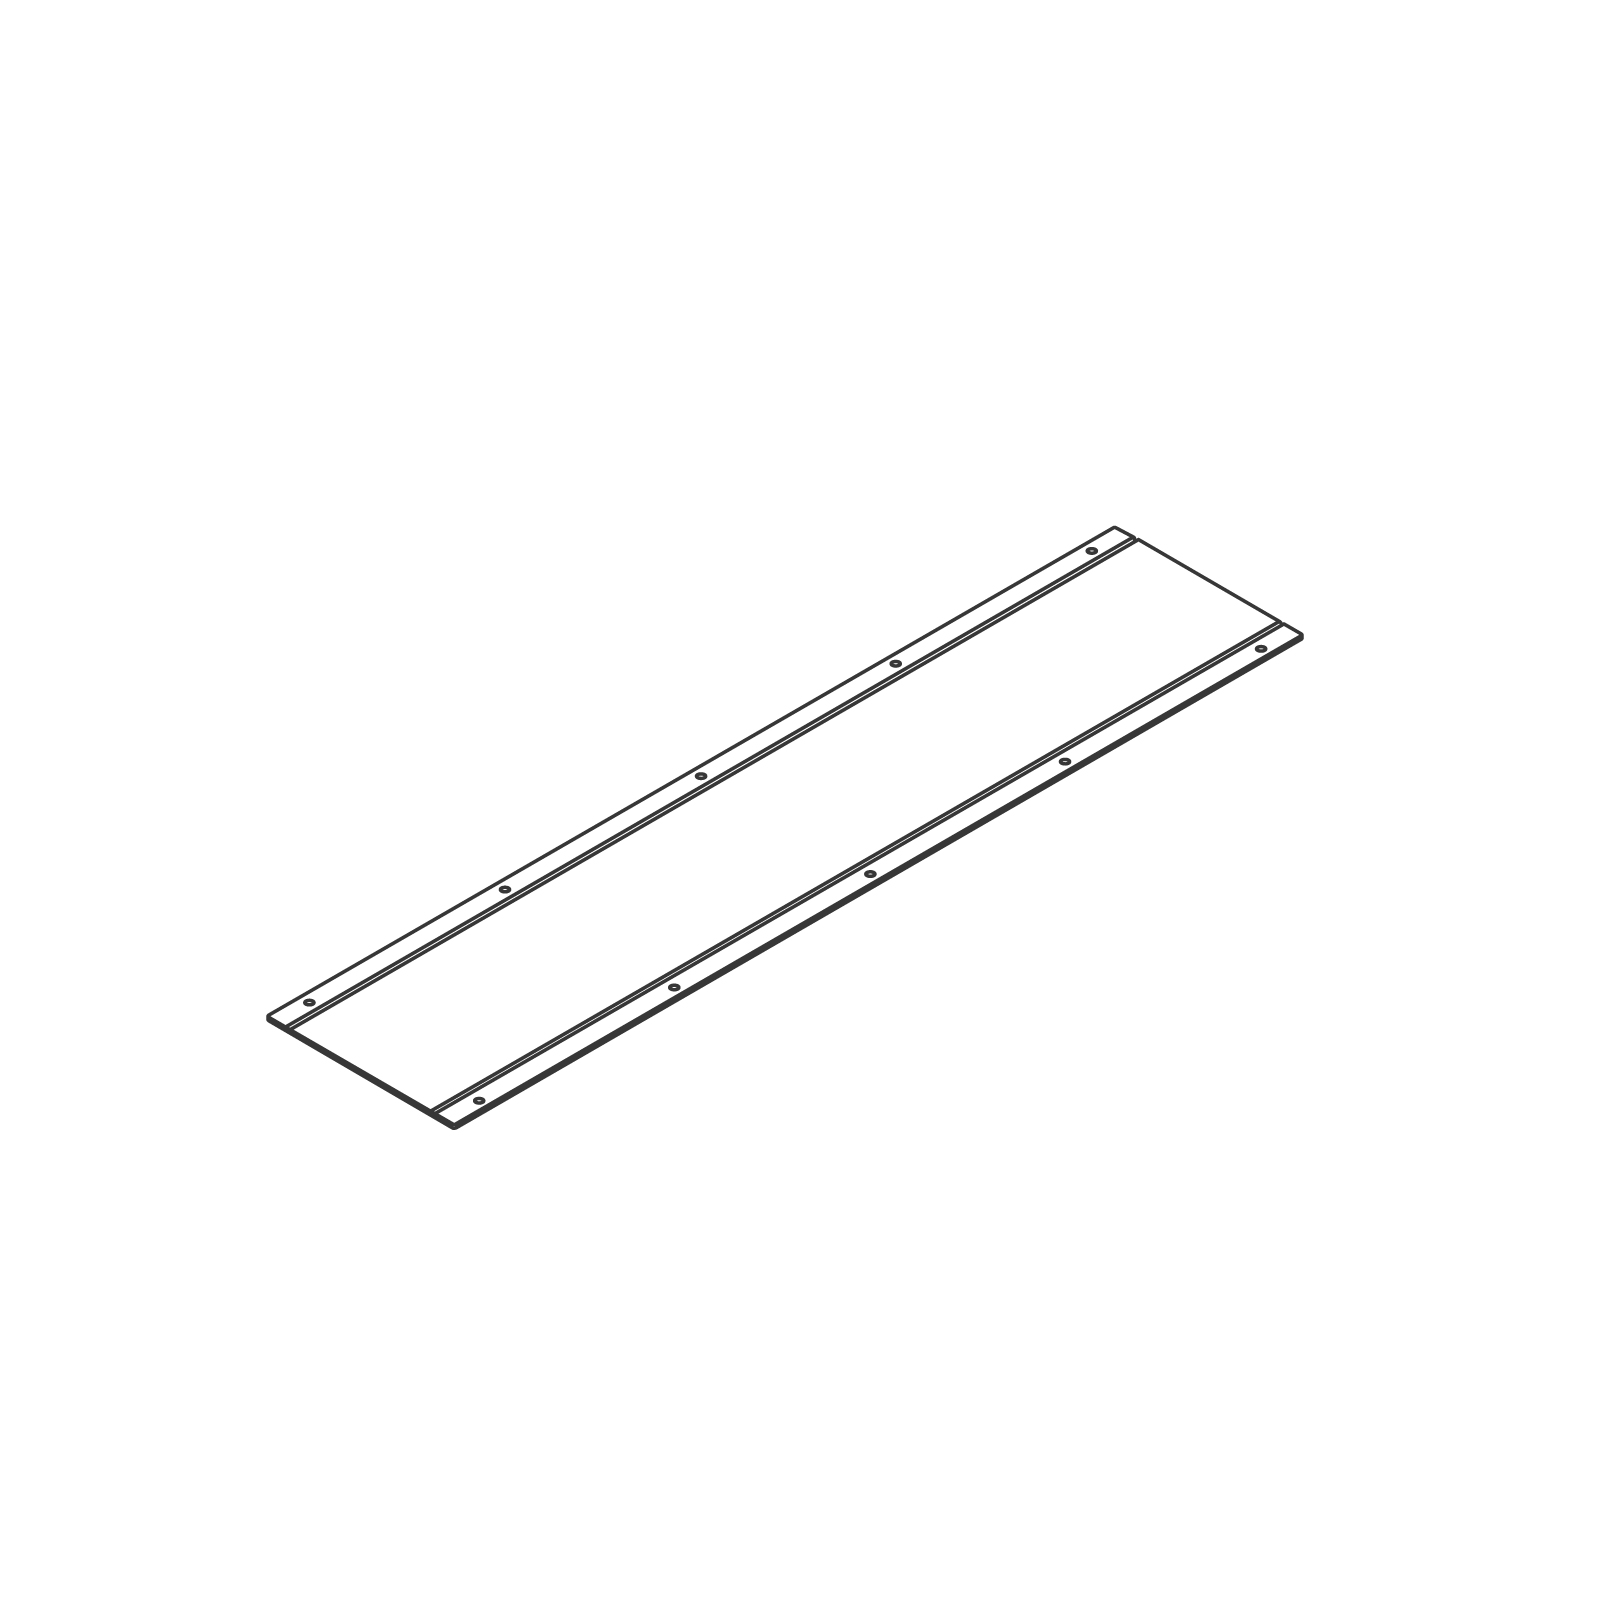 A line drawing - OE1 Agile Wall – Corner Cover